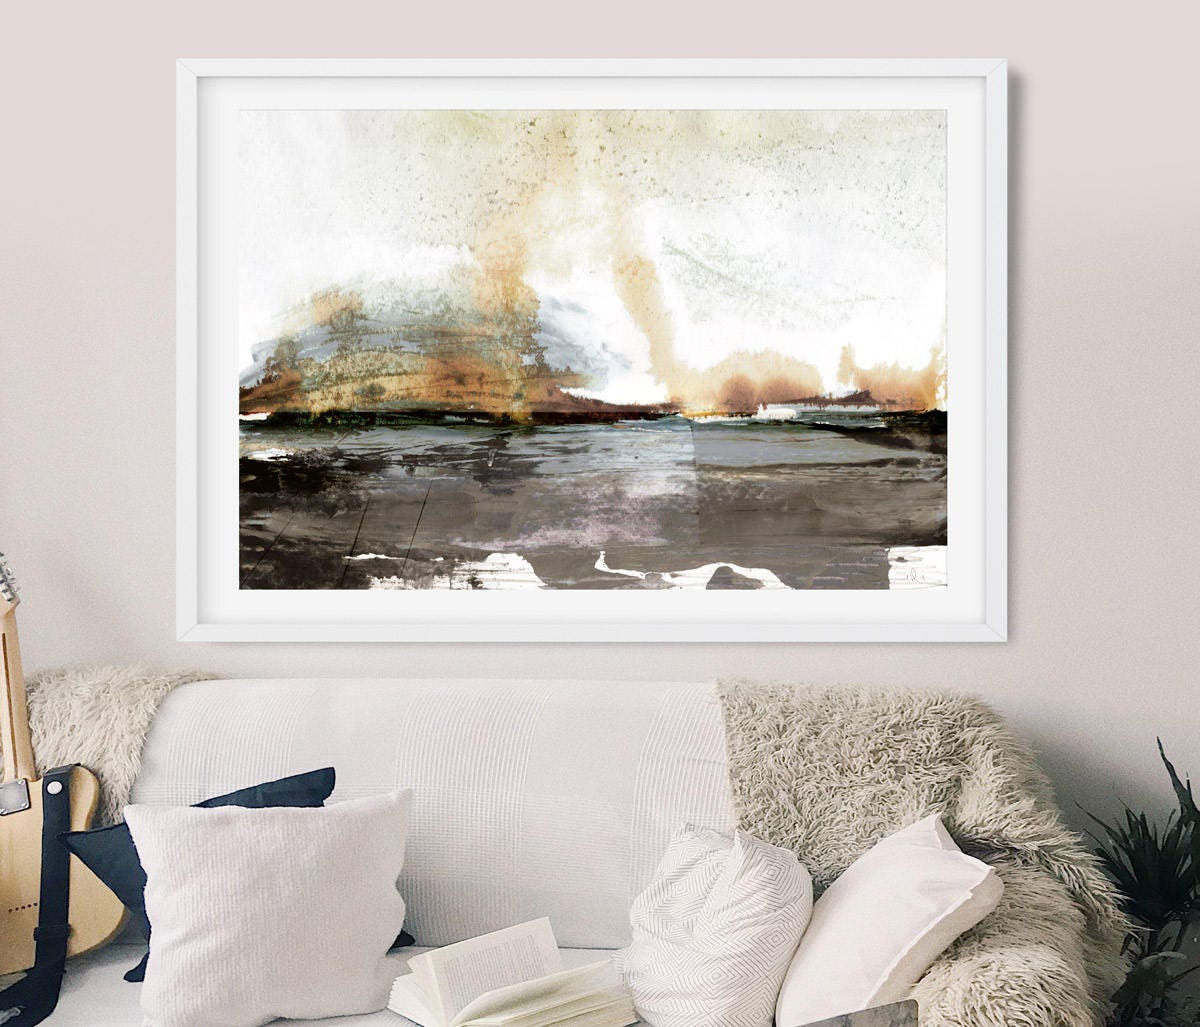 Contemporary Digital Art Prints Instant Download Abstract Landscape Oil Painting Digital Art PRINTABLE